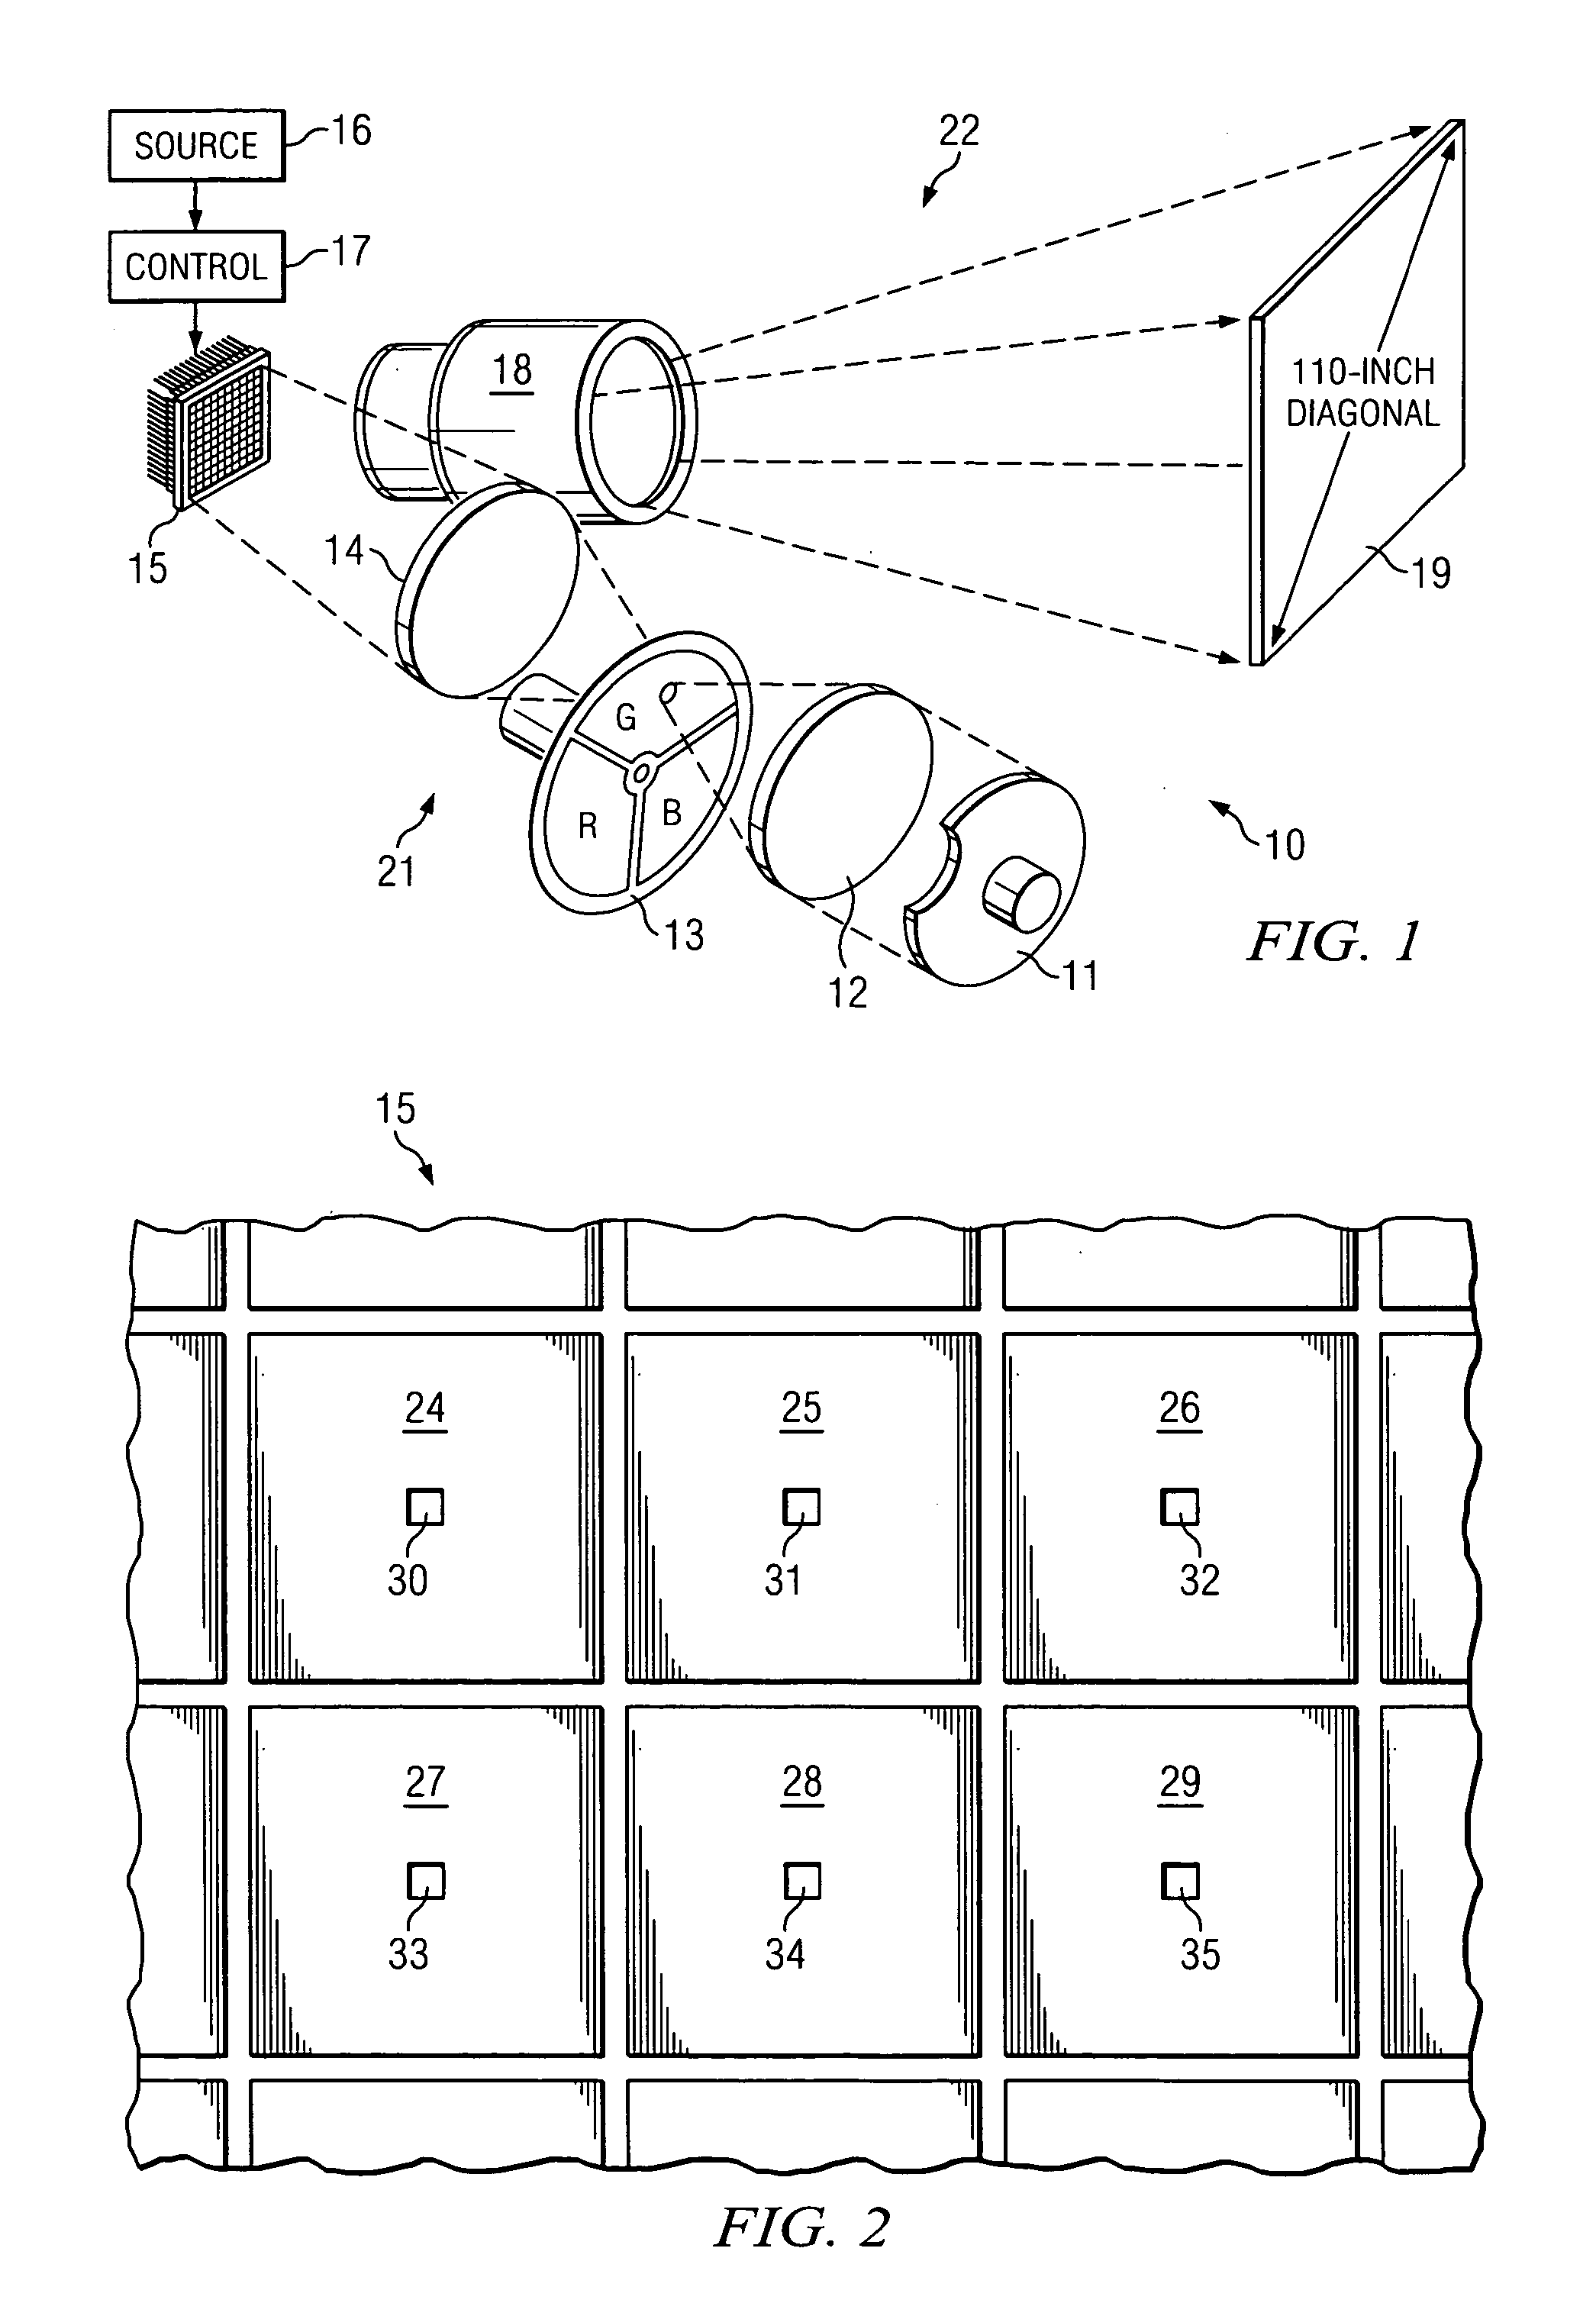 MEMS device and method